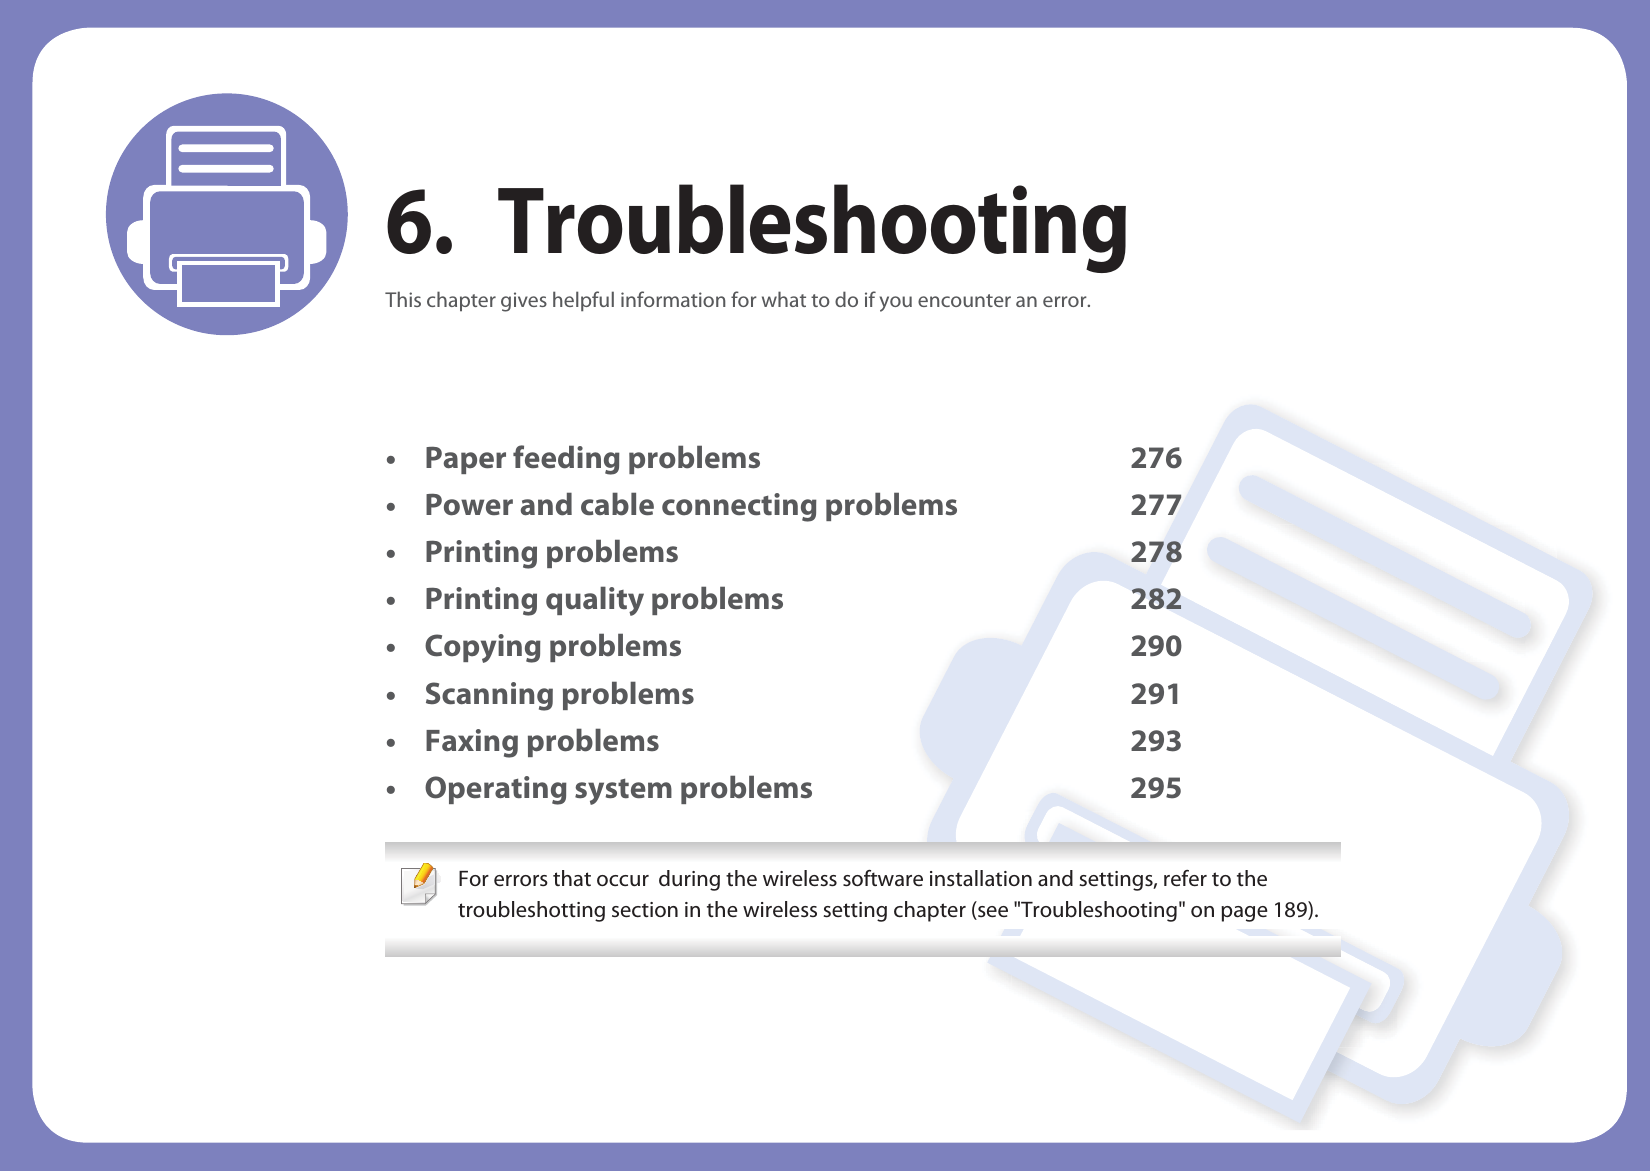 6. TroubleshootingThis chapter gives helpful information for what to do if you encounter an error.• Paper feeding problems 276• Power and cable connecting problems 277• Printing problems 278• Printing quality problems 282• Copying problems 290• Scanning problems 291• Faxing problems 293• Operating system problems 295 For errors that occur  during the wireless software installation and settings, refer to the troubleshotting section in the wireless setting chapter (see &quot;Troubleshooting&quot; on page 189). 